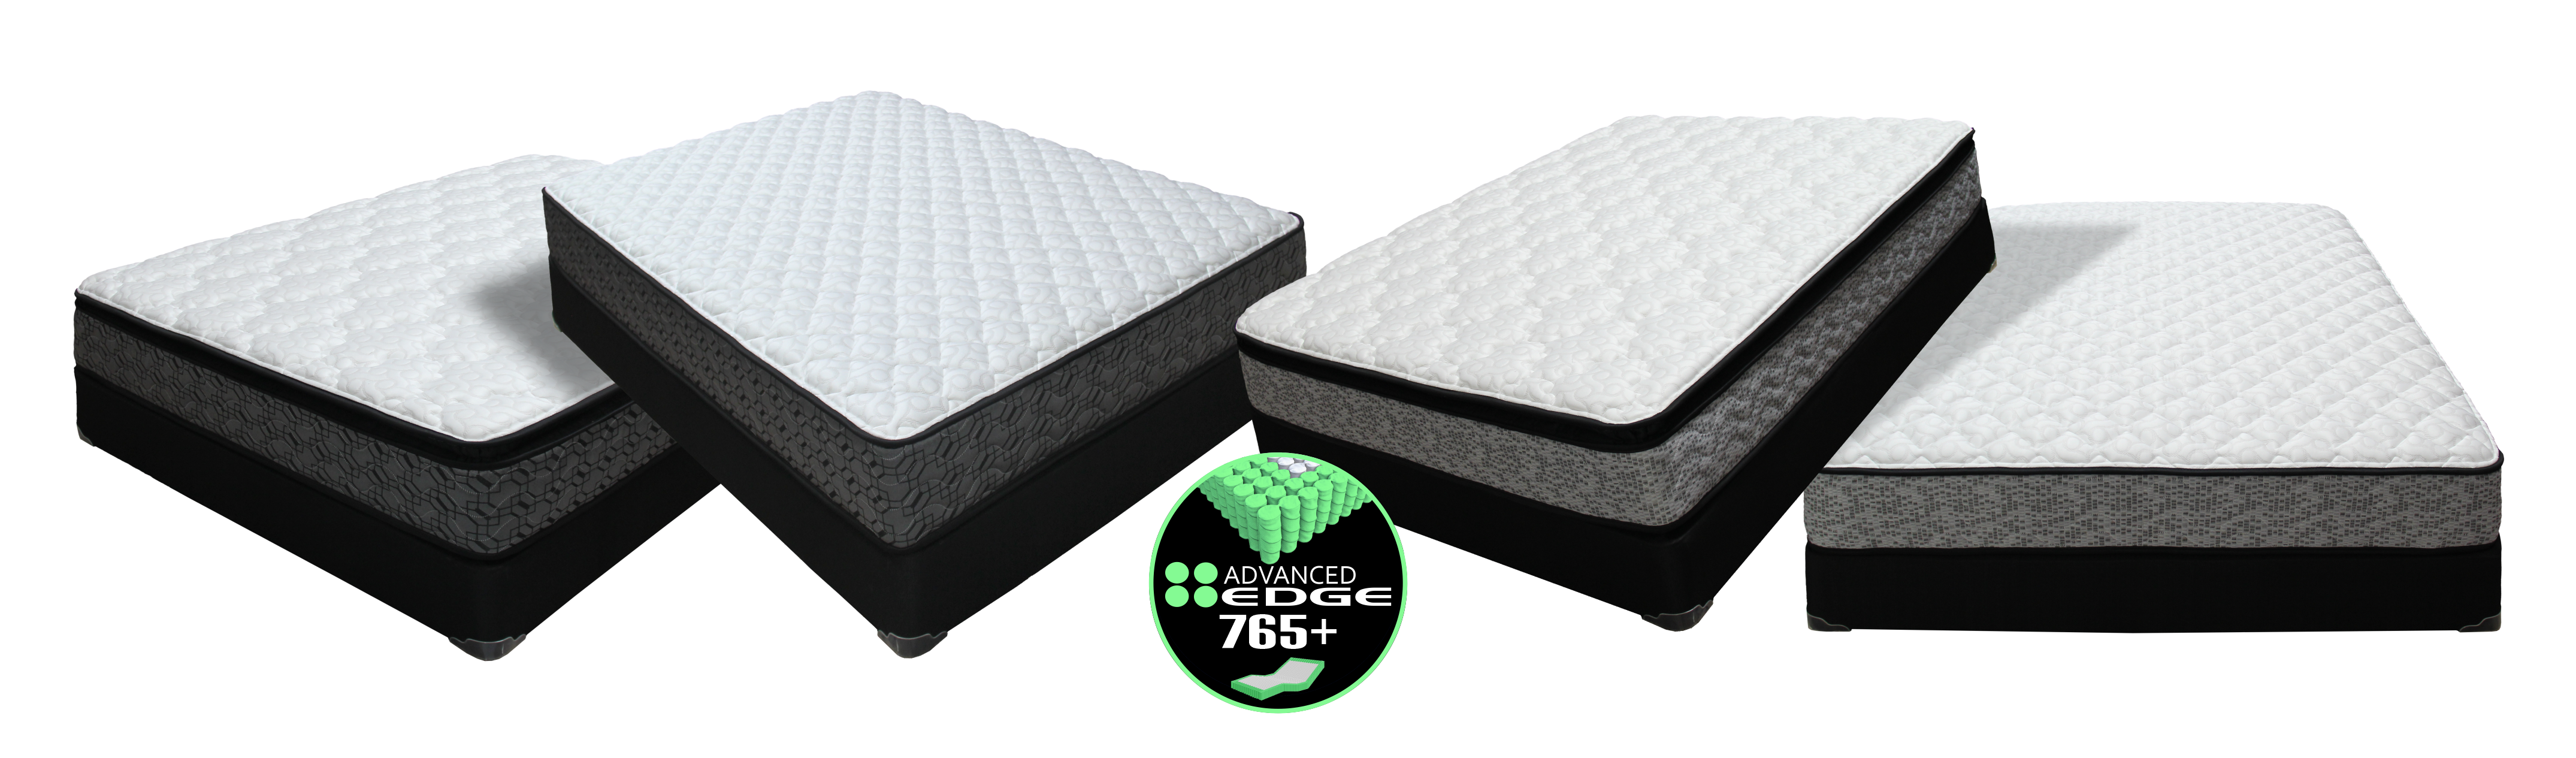 Edge B20 and S2000 Pillow Tops and Firms